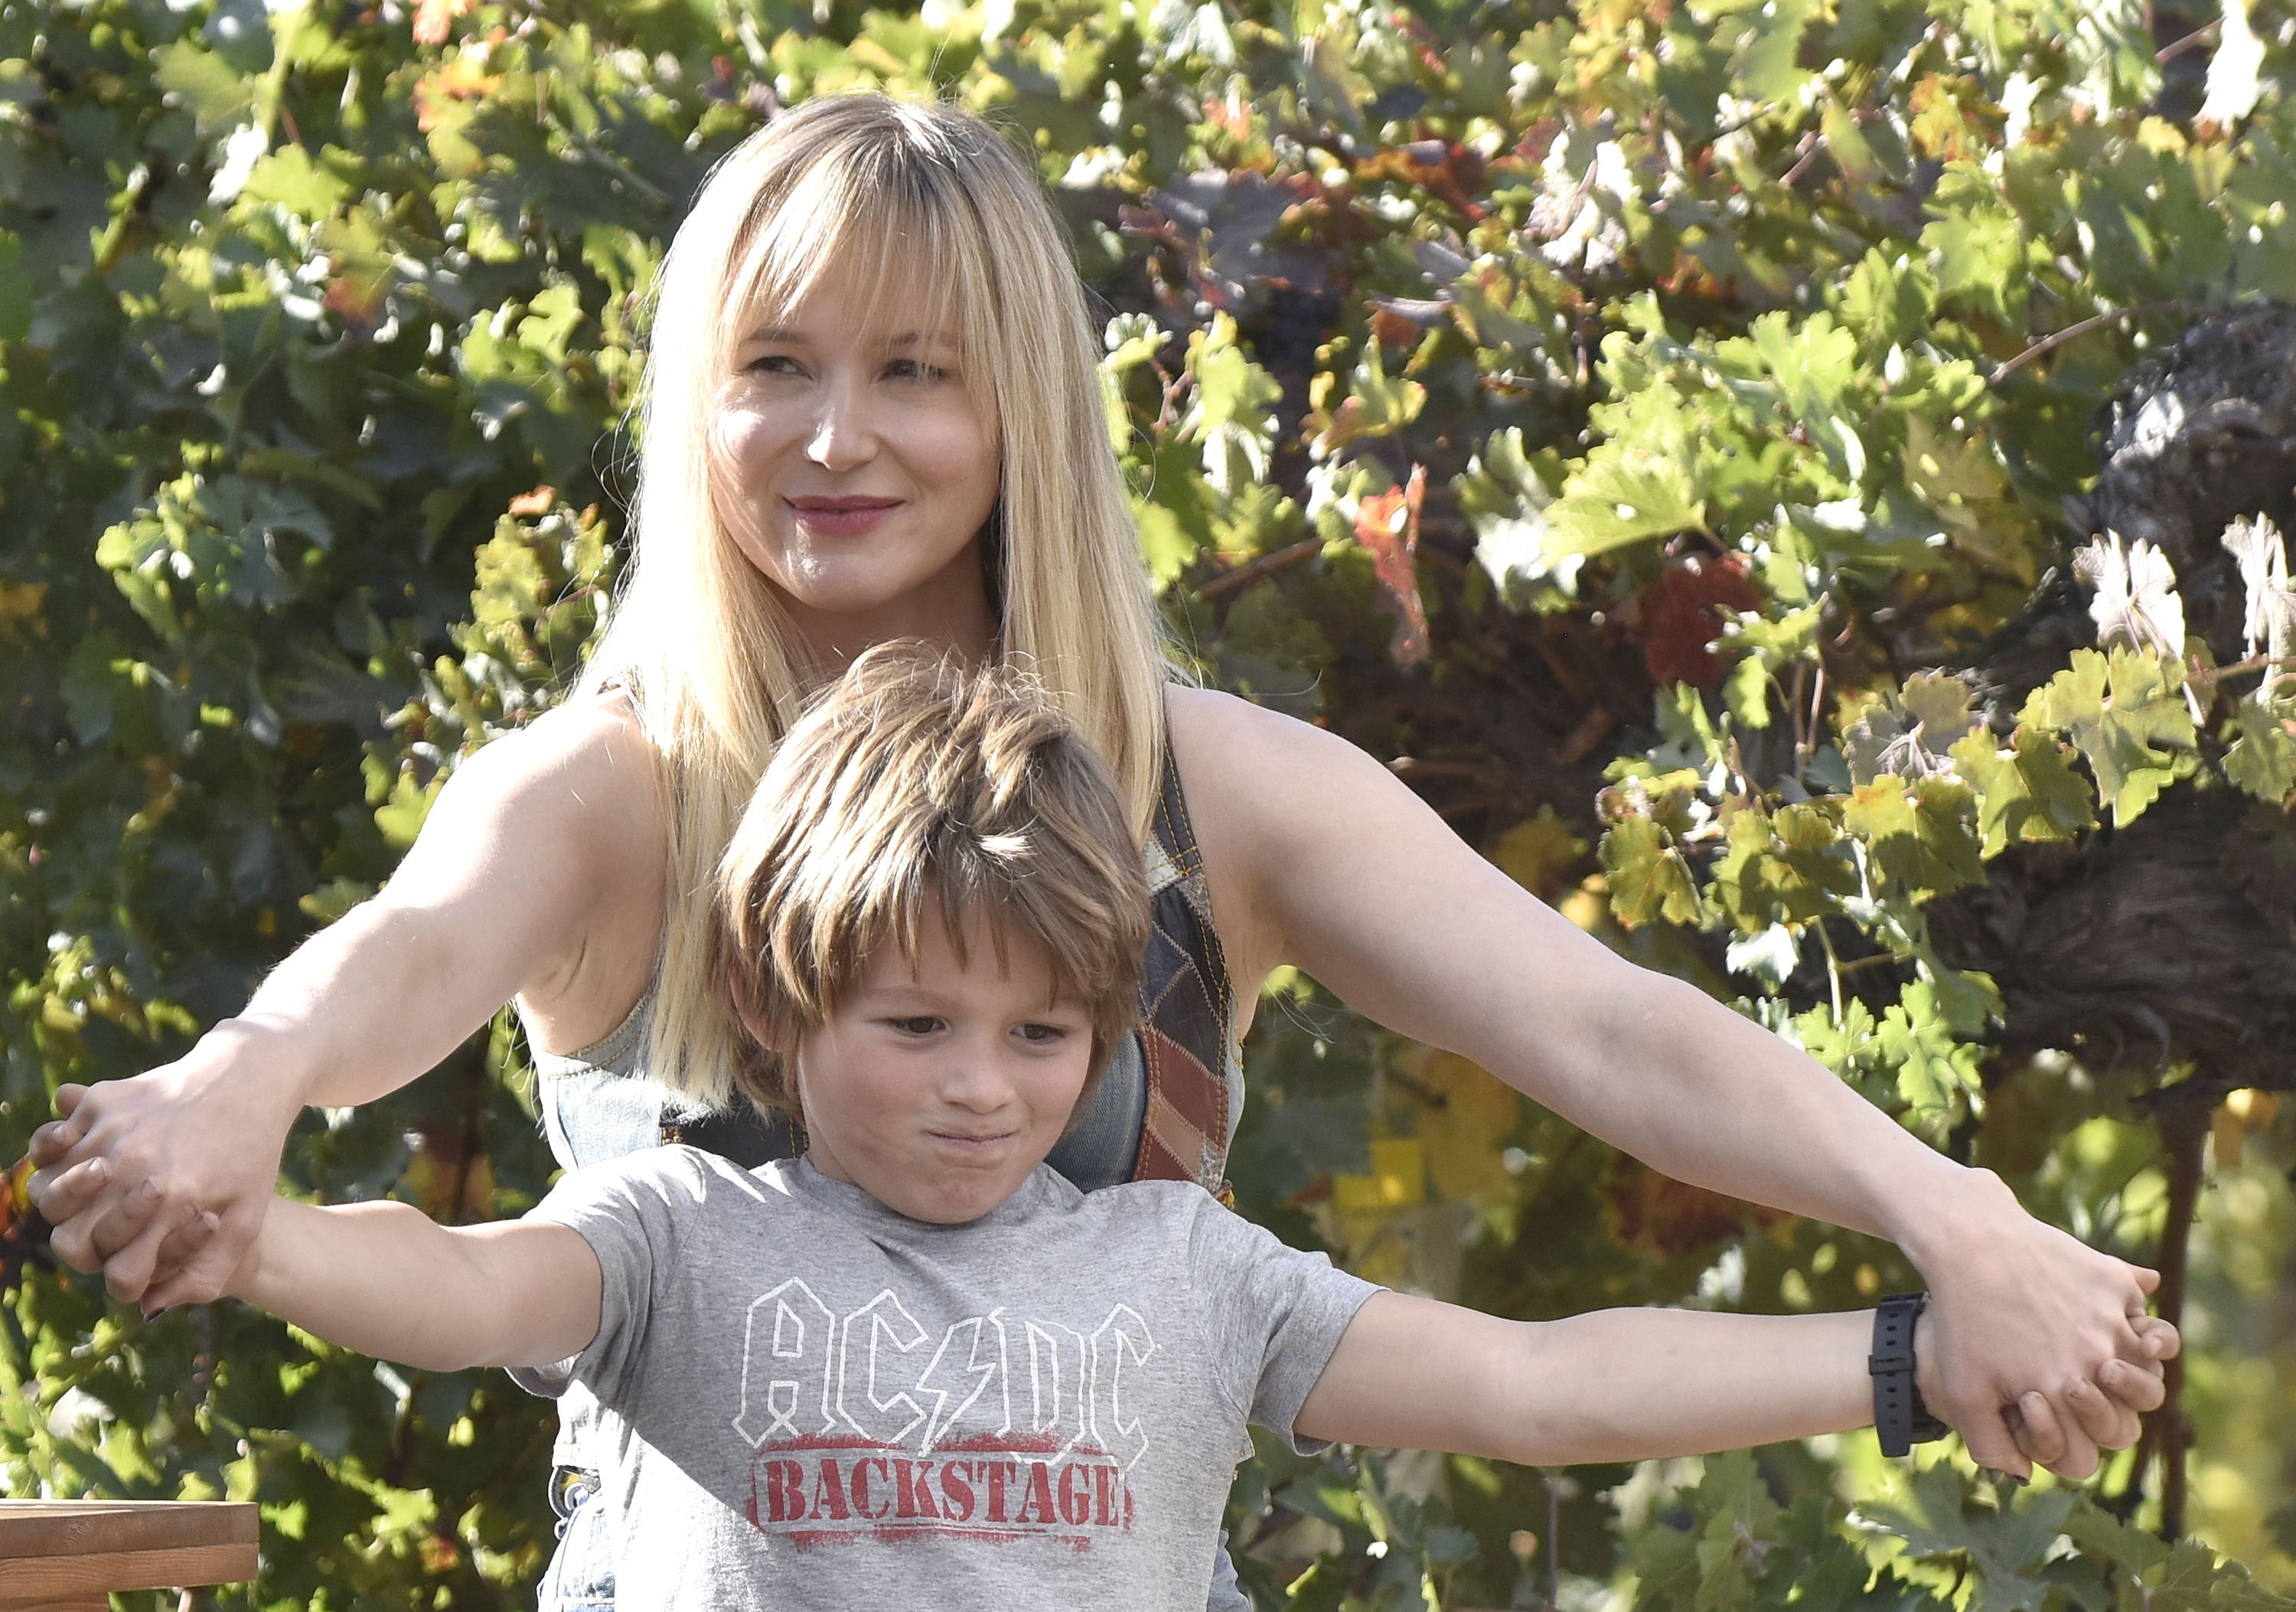 Jewel and Kase Townes Murray are seen during Live in the Vineyard in Napa, California, on November 2, 2019. | Source: Getty Images